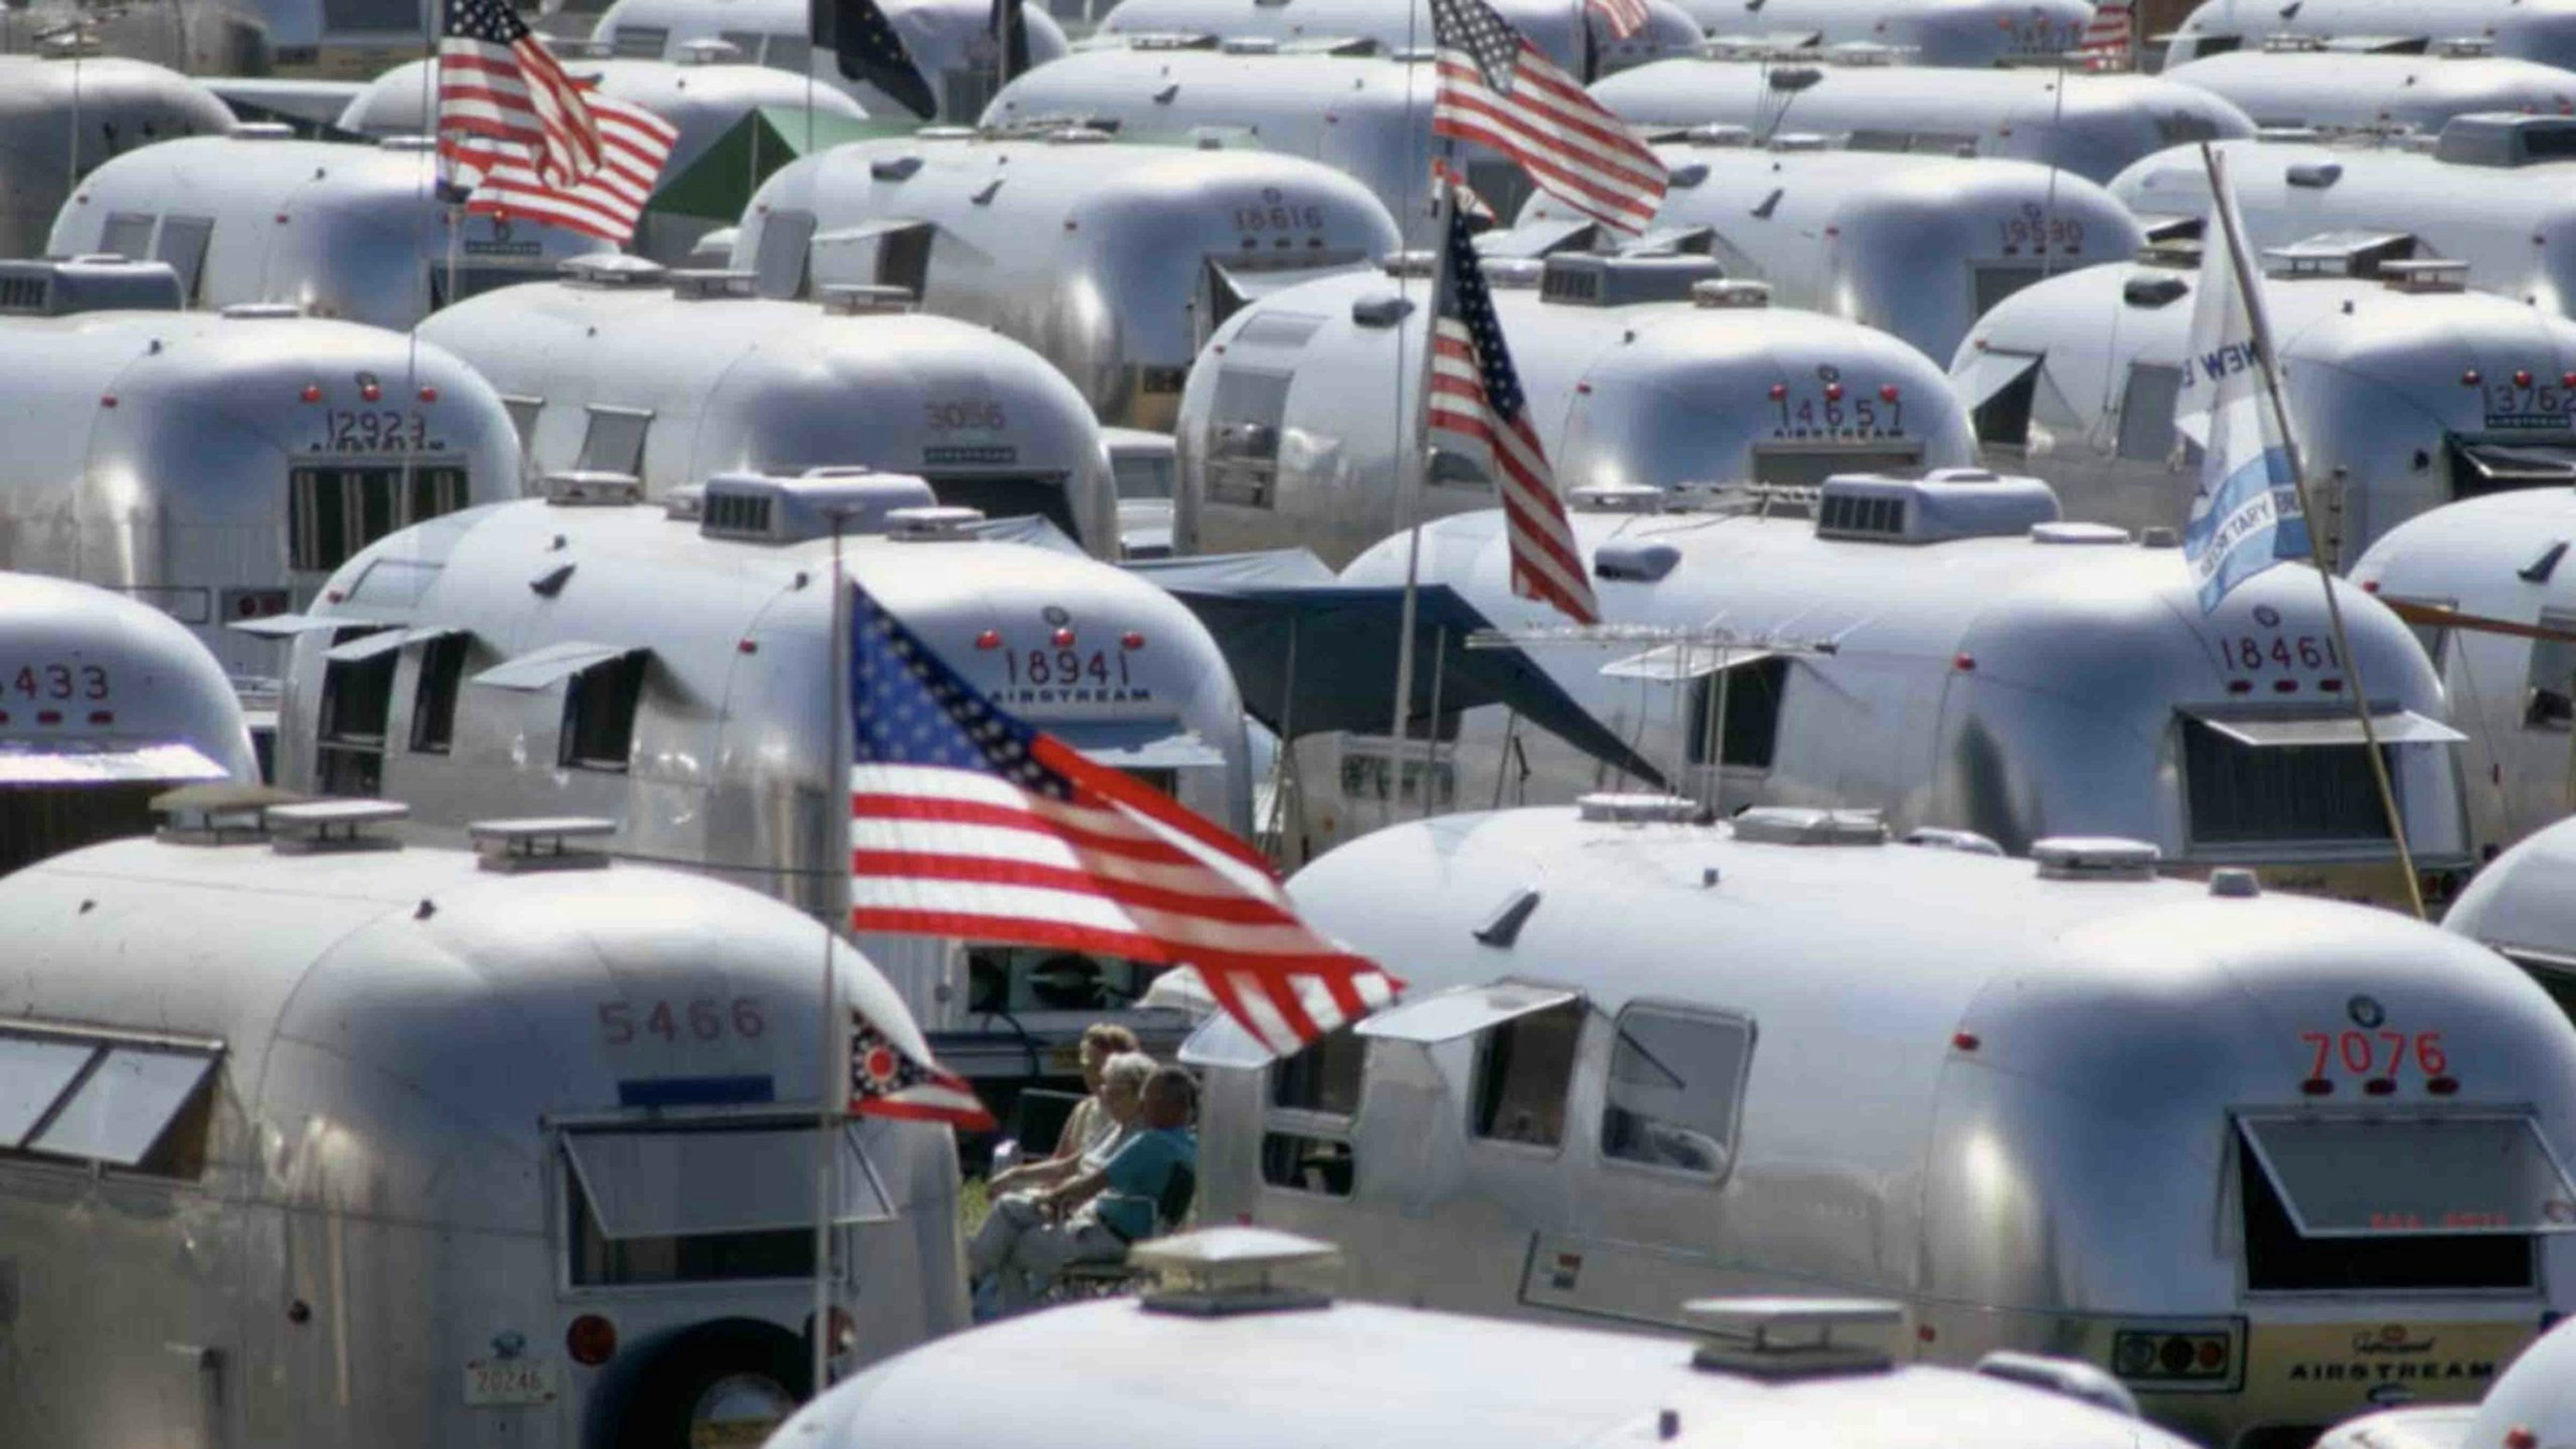 Rock Springs to Host Thousands At International Airstream Rally Later